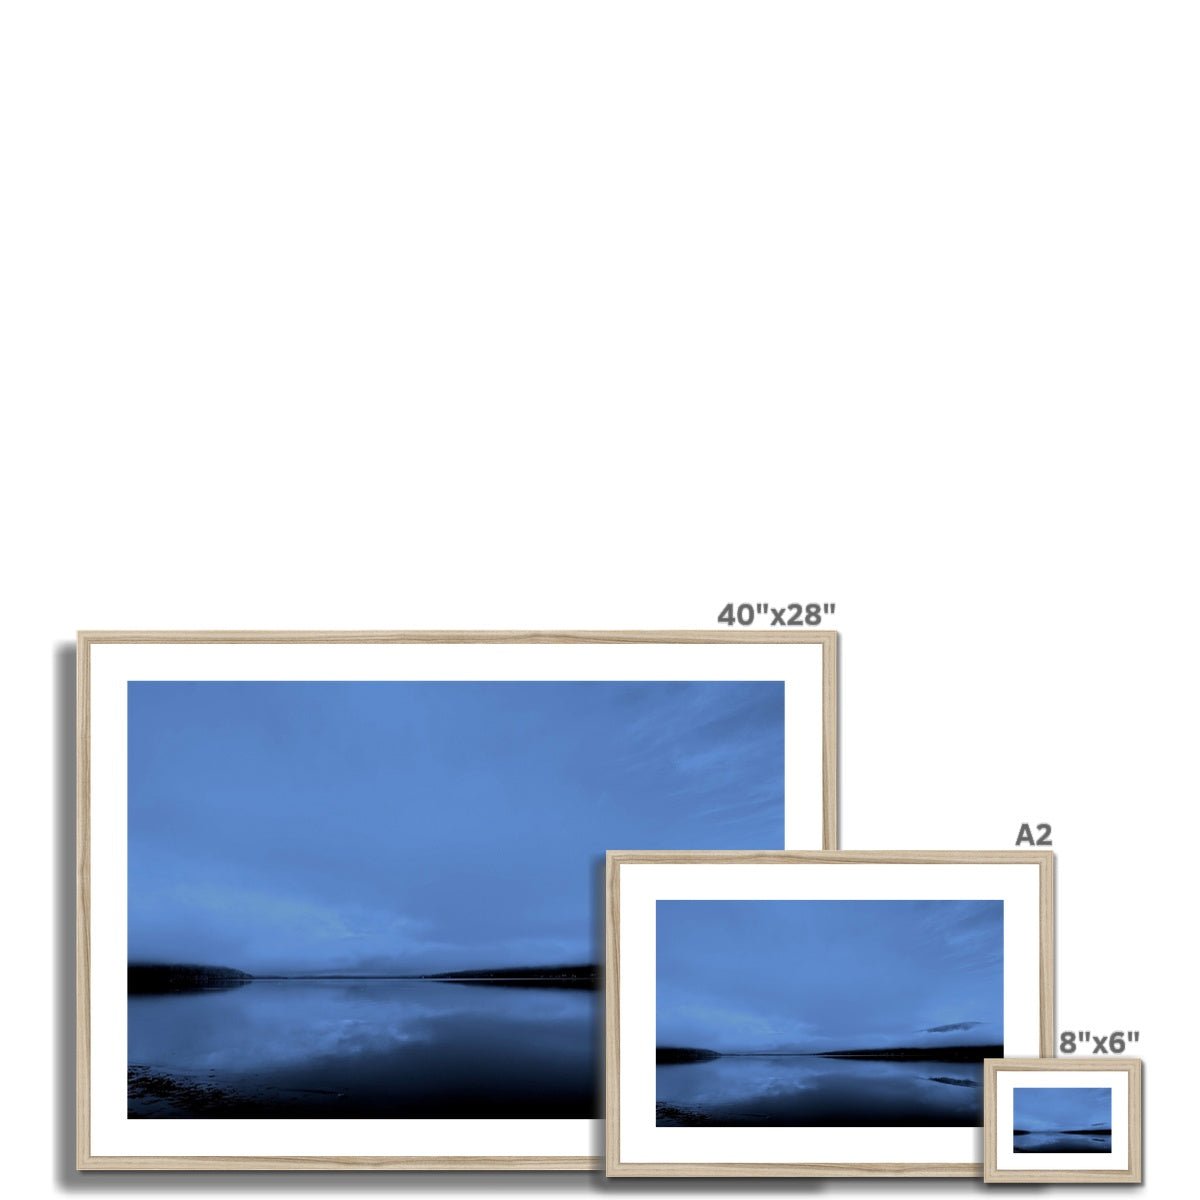 The Blue Hour Loch Fyne Painting | Framed & Mounted Prints From Scotland-Framed & Mounted Prints-Scottish Lochs & Mountains Art Gallery-Paintings, Prints, Homeware, Art Gifts From Scotland By Scottish Artist Kevin Hunter